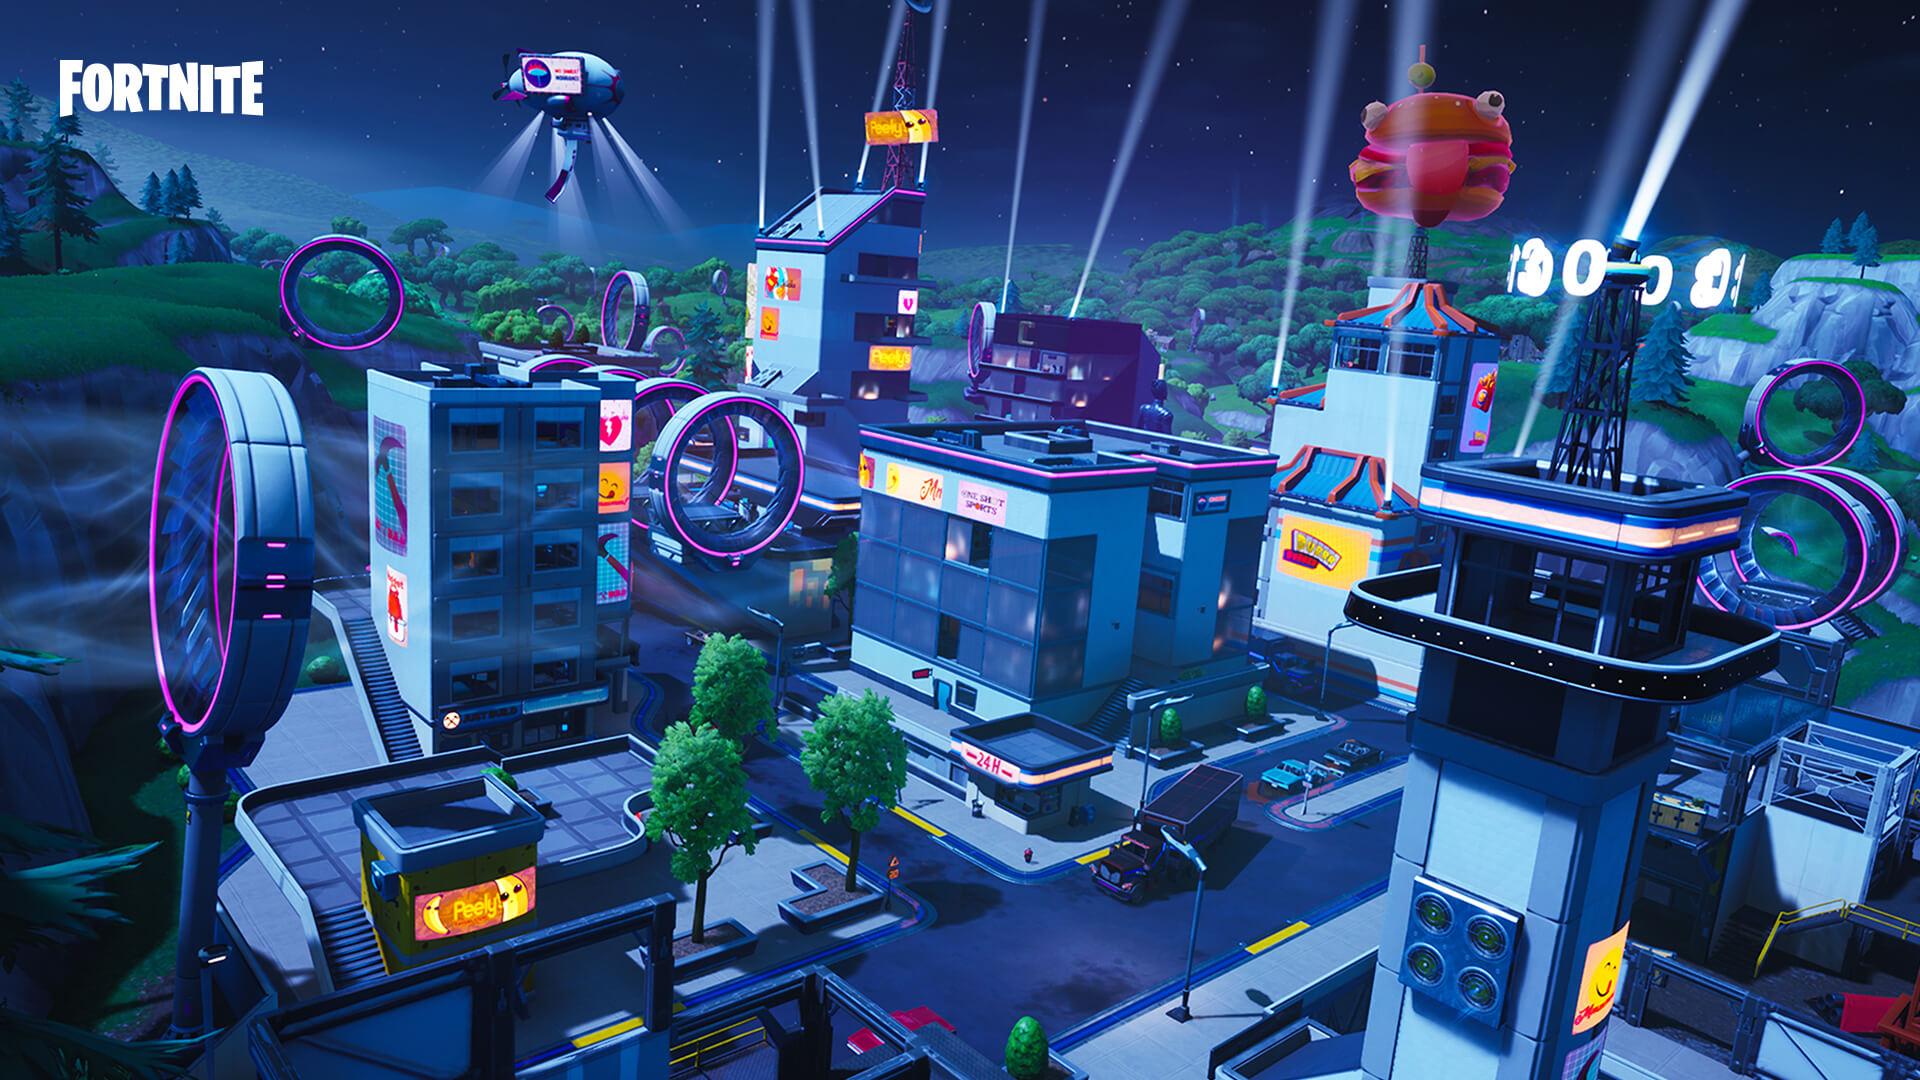 Here Are All The 'Fortnite' Season 9 Map Changes: Neo Tilted, Mega